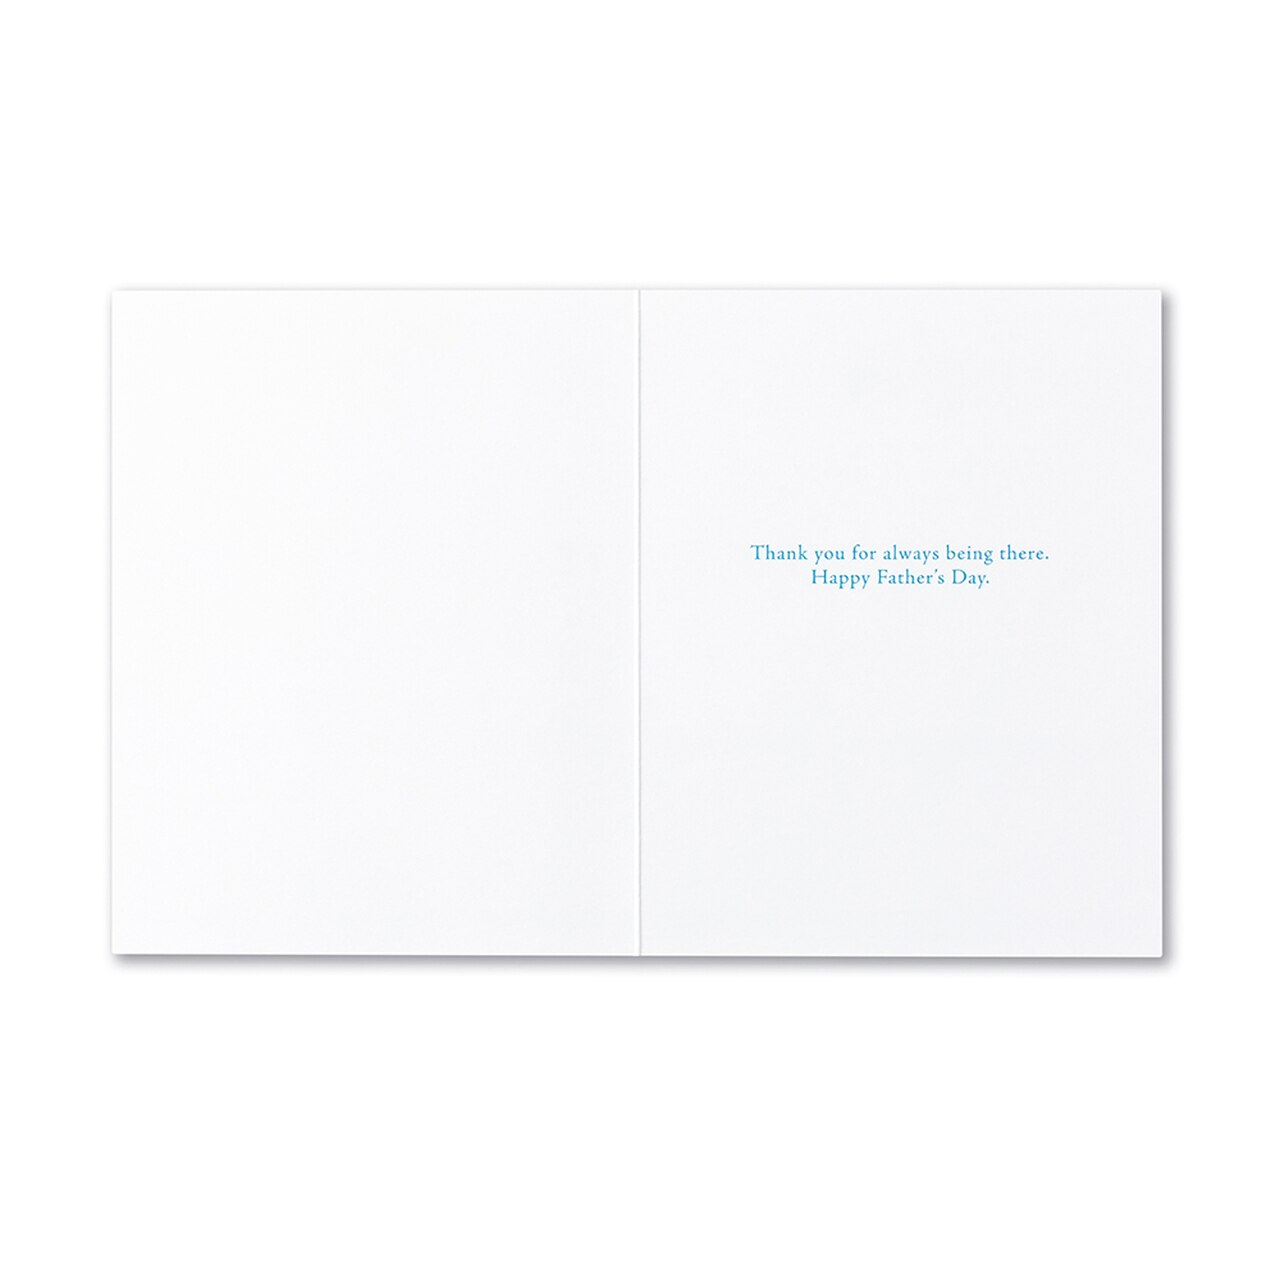 Positively Green Greeting Card - Father's Day - “Some things don't last forever, but some things do.” —Sarah Dessen - Mellow Monkey